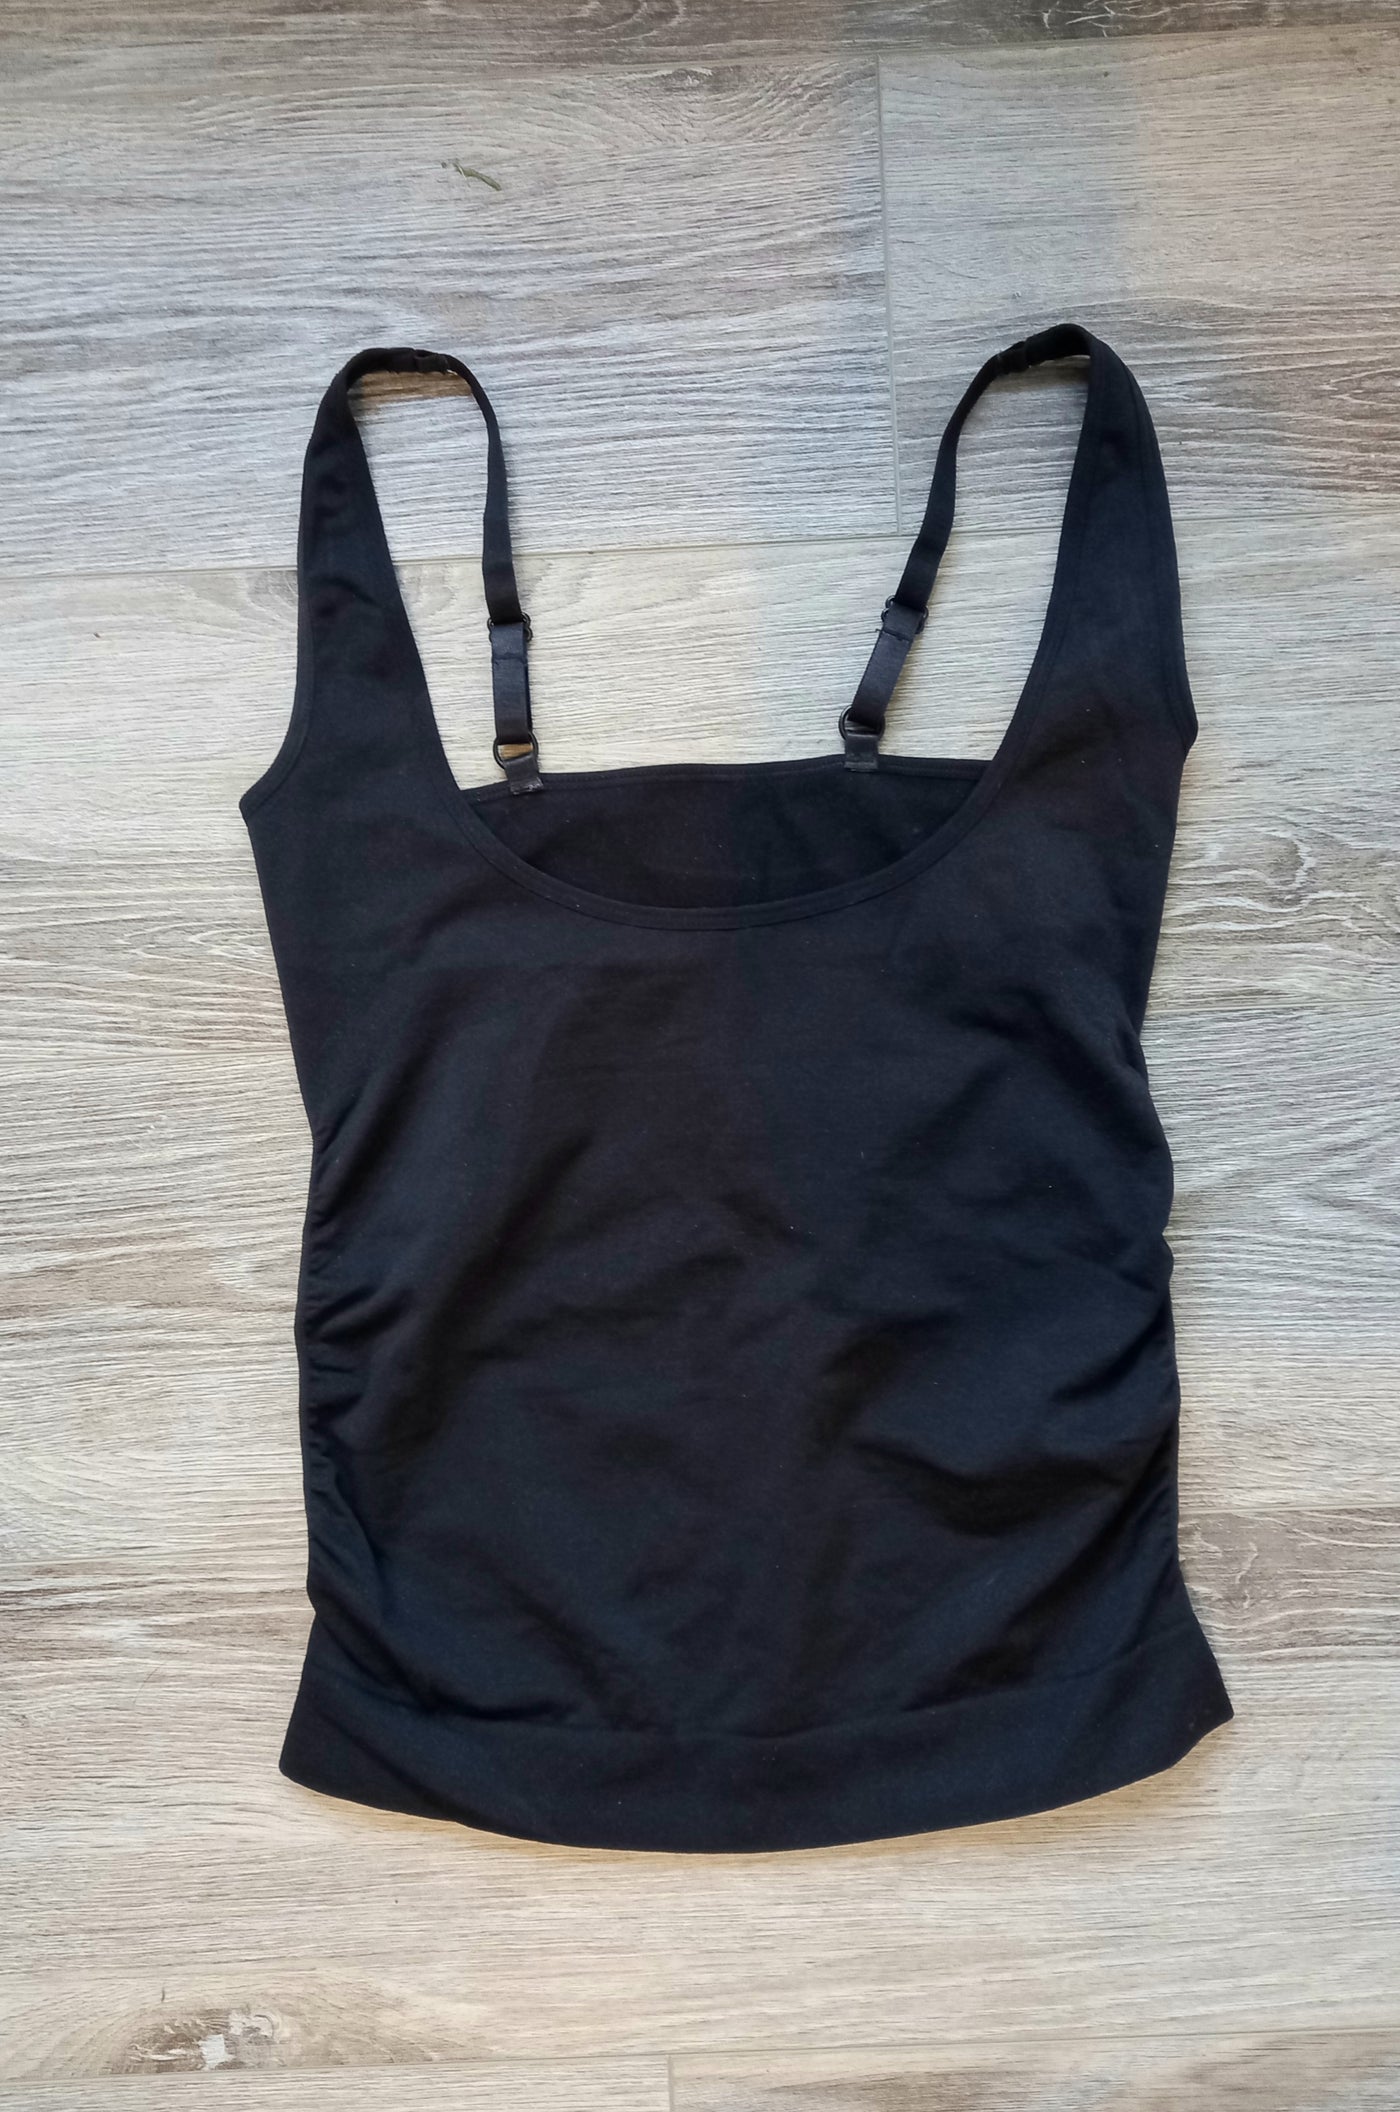 George Maternity Black Support Top - Size S (Approx UK 8/10)